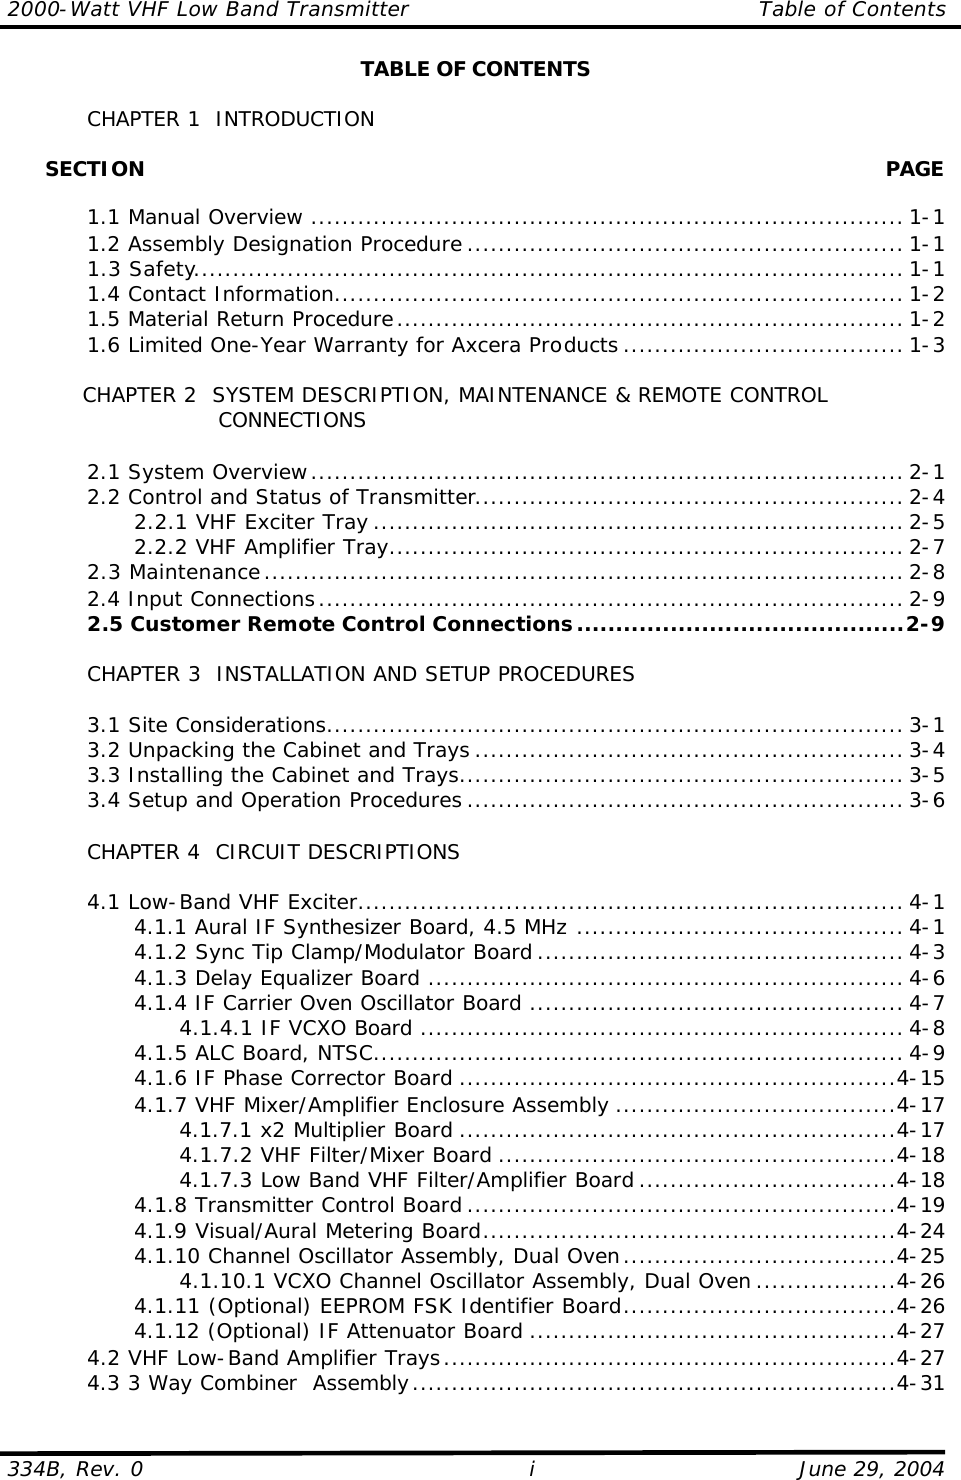 2000-Watt VHF Low Band Transmitter Table of Contents  334B, Rev. 0 i June 29, 2004 TABLE OF CONTENTS   CHAPTER 1  INTRODUCTION        SECTION    PAGE   1.1 Manual Overview ............................................................................ 1-1  1.2 Assembly Designation Procedure ........................................................ 1-1  1.3 Safety........................................................................................... 1-1  1.4 Contact Information......................................................................... 1-2  1.5 Material Return Procedure................................................................. 1-2  1.6 Limited One-Year Warranty for Axcera Products .................................... 1-3   CHAPTER 2  SYSTEM DESCRIPTION, MAINTENANCE &amp; REMOTE CONTROL            CONNECTIONS   2.1 System Overview............................................................................ 2-1  2.2 Control and Status of Transmitter....................................................... 2-4     2.2.1 VHF Exciter Tray .................................................................... 2-5     2.2.2 VHF Amplifier Tray.................................................................. 2-7  2.3 Maintenance.................................................................................. 2-8  2.4 Input Connections........................................................................... 2-9  2.5 Customer Remote Control Connections..........................................2-9   CHAPTER 3  INSTALLATION AND SETUP PROCEDURES     3.1 Site Considerations.......................................................................... 3-1  3.2 Unpacking the Cabinet and Trays ....................................................... 3-4  3.3 Installing the Cabinet and Trays......................................................... 3-5  3.4 Setup and Operation Procedures ........................................................ 3-6   CHAPTER 4  CIRCUIT DESCRIPTIONS   4.1 Low-Band VHF Exciter...................................................................... 4-1     4.1.1 Aural IF Synthesizer Board, 4.5 MHz .......................................... 4-1     4.1.2 Sync Tip Clamp/Modulator Board ............................................... 4-3     4.1.3 Delay Equalizer Board ............................................................. 4-6     4.1.4 IF Carrier Oven Oscillator Board ................................................ 4-7       4.1.4.1 IF VCXO Board .............................................................. 4-8     4.1.5 ALC Board, NTSC.................................................................... 4-9     4.1.6 IF Phase Corrector Board ........................................................4-15     4.1.7 VHF Mixer/Amplifier Enclosure Assembly ....................................4-17       4.1.7.1 x2 Multiplier Board ........................................................4-17       4.1.7.2 VHF Filter/Mixer Board ...................................................4-18       4.1.7.3 Low Band VHF Filter/Amplifier Board .................................4-18     4.1.8 Transmitter Control Board .......................................................4-19     4.1.9 Visual/Aural Metering Board.....................................................4-24     4.1.10 Channel Oscillator Assembly, Dual Oven...................................4-25       4.1.10.1 VCXO Channel Oscillator Assembly, Dual Oven ..................4-26     4.1.11 (Optional) EEPROM FSK Identifier Board...................................4-26     4.1.12 (Optional) IF Attenuator Board ...............................................4-27  4.2 VHF Low-Band Amplifier Trays..........................................................4-27  4.3 3 Way Combiner  Assembly..............................................................4-31 